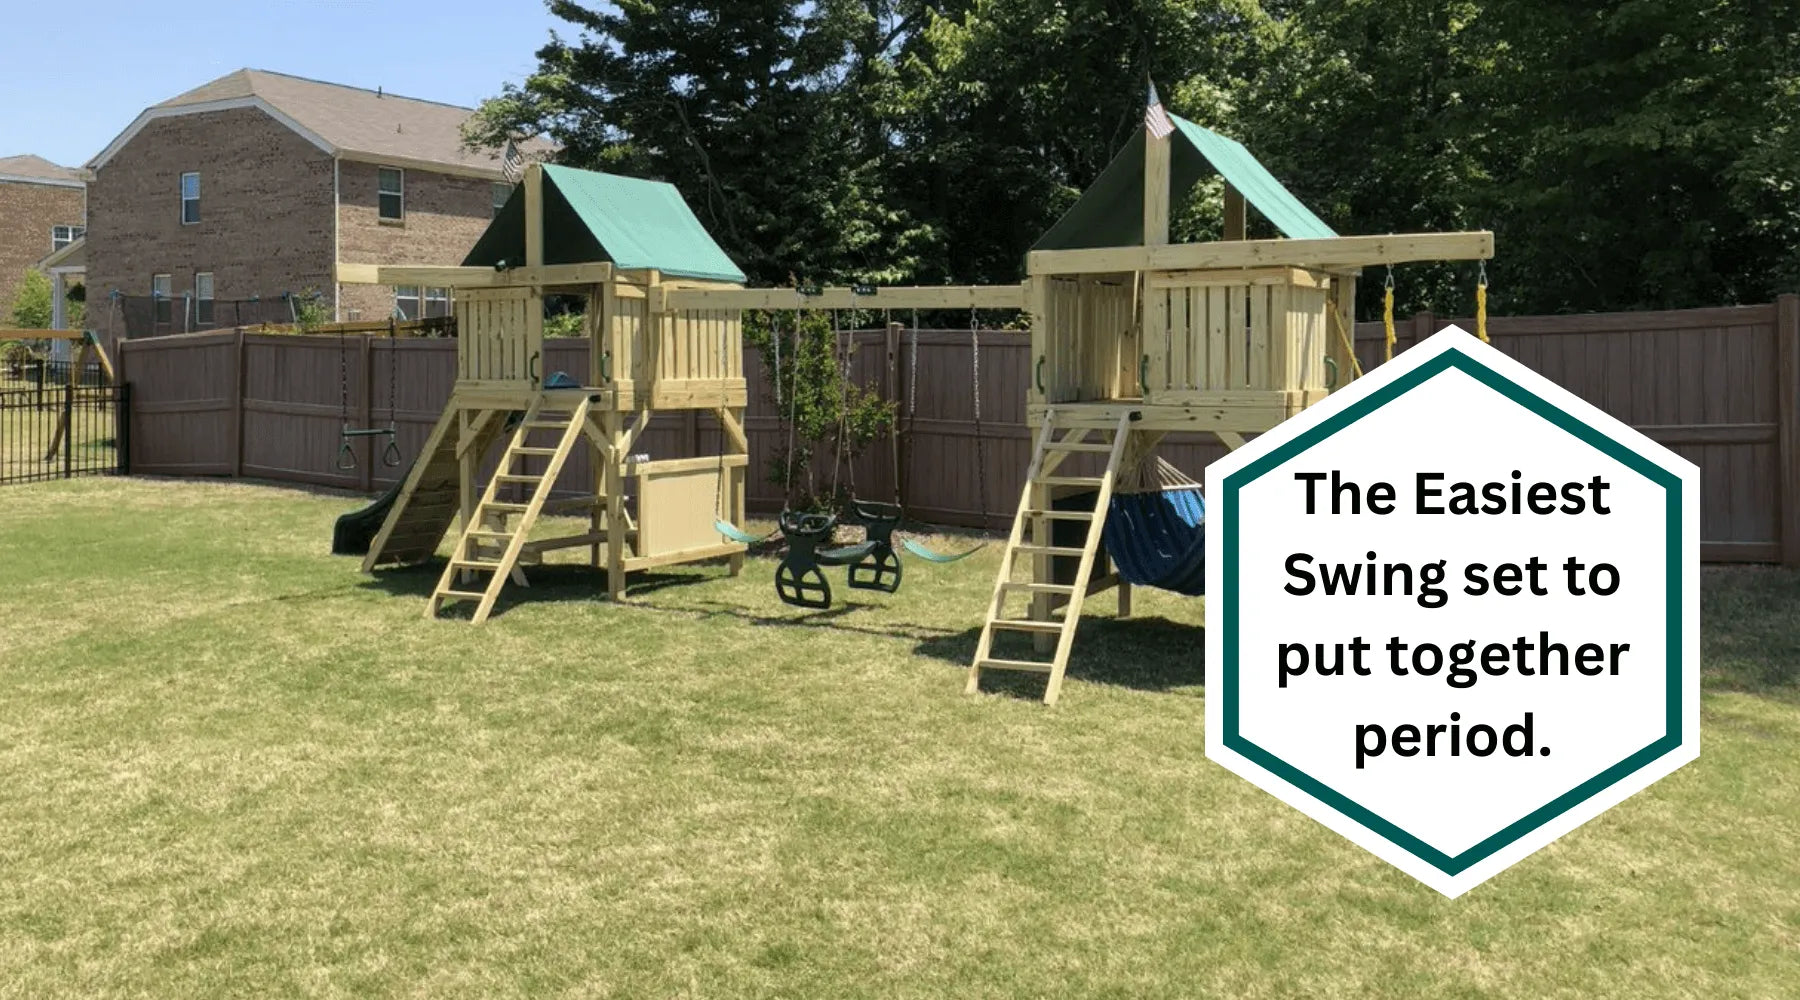 The easiest wooden swing set to put together, period.